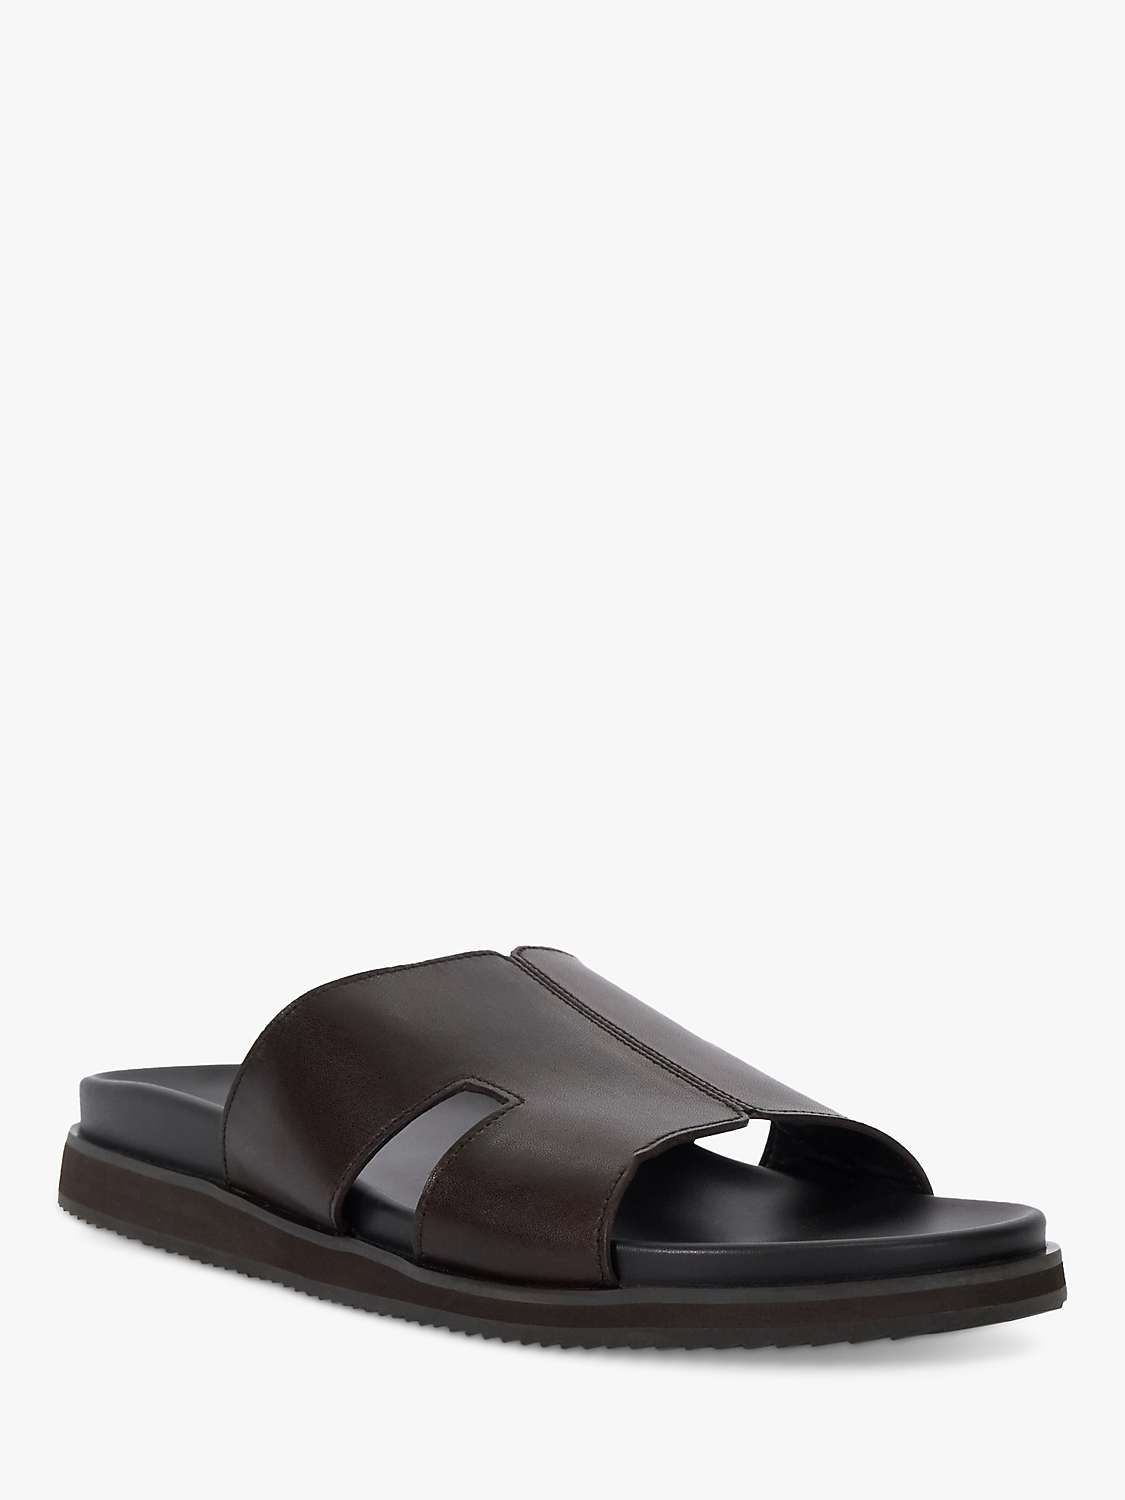 Buy Dune Insight Cutout Leather Sandals, Brown Online at johnlewis.com